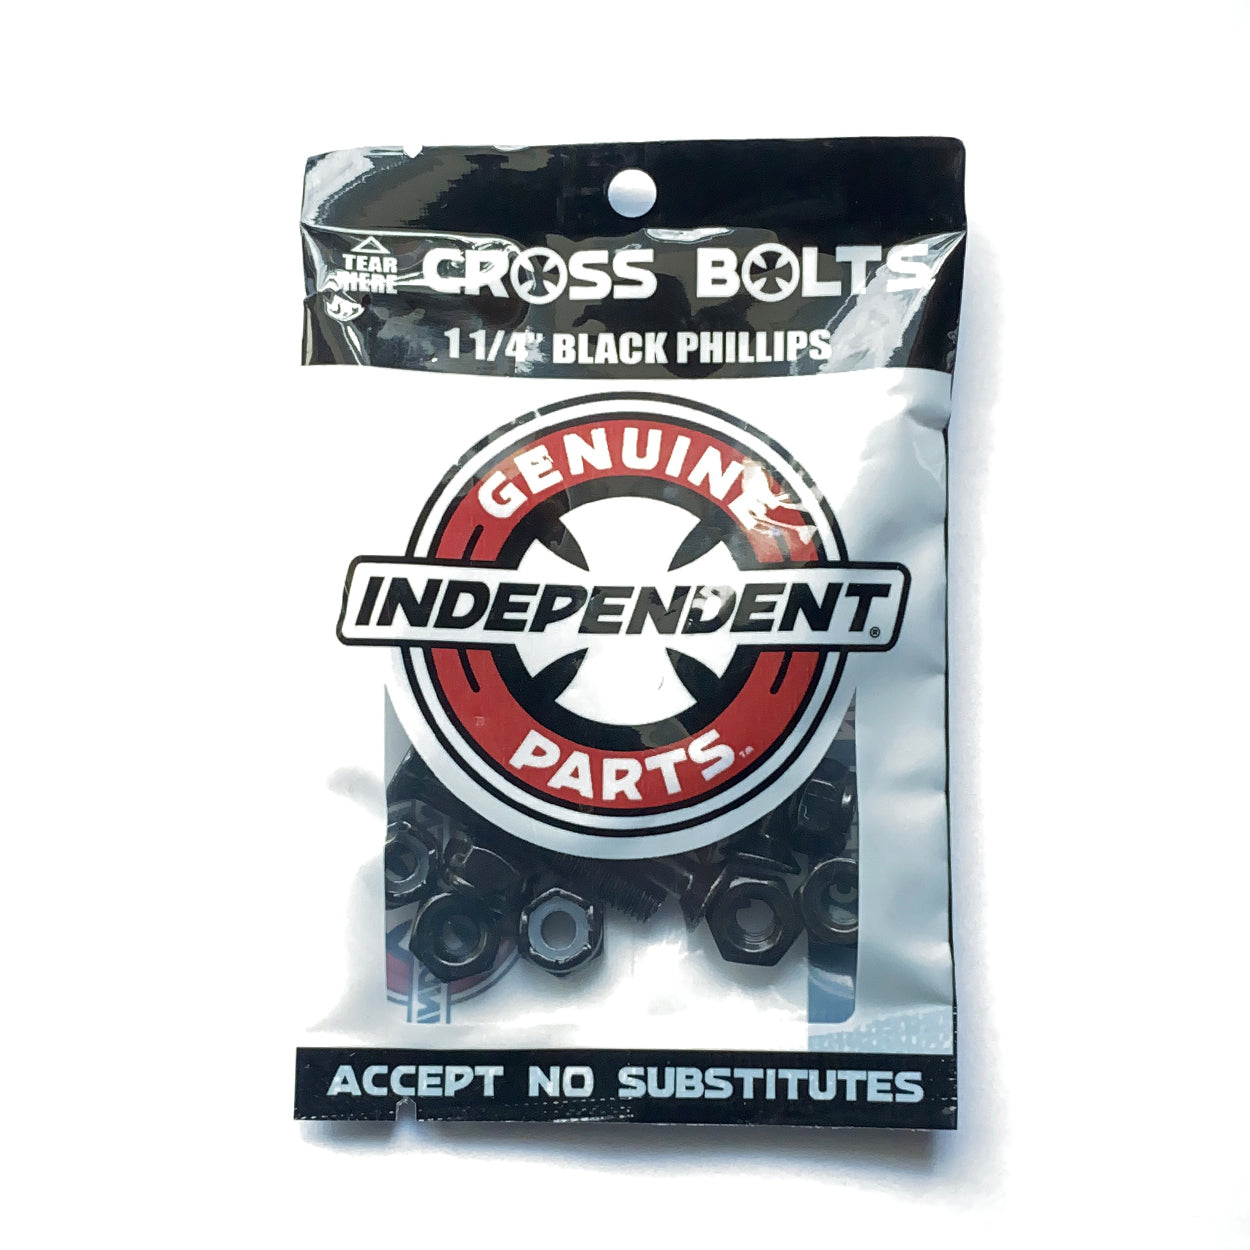 Independent Bolts Phillips 1 1/4" Bolts - Black - Prime Delux Store